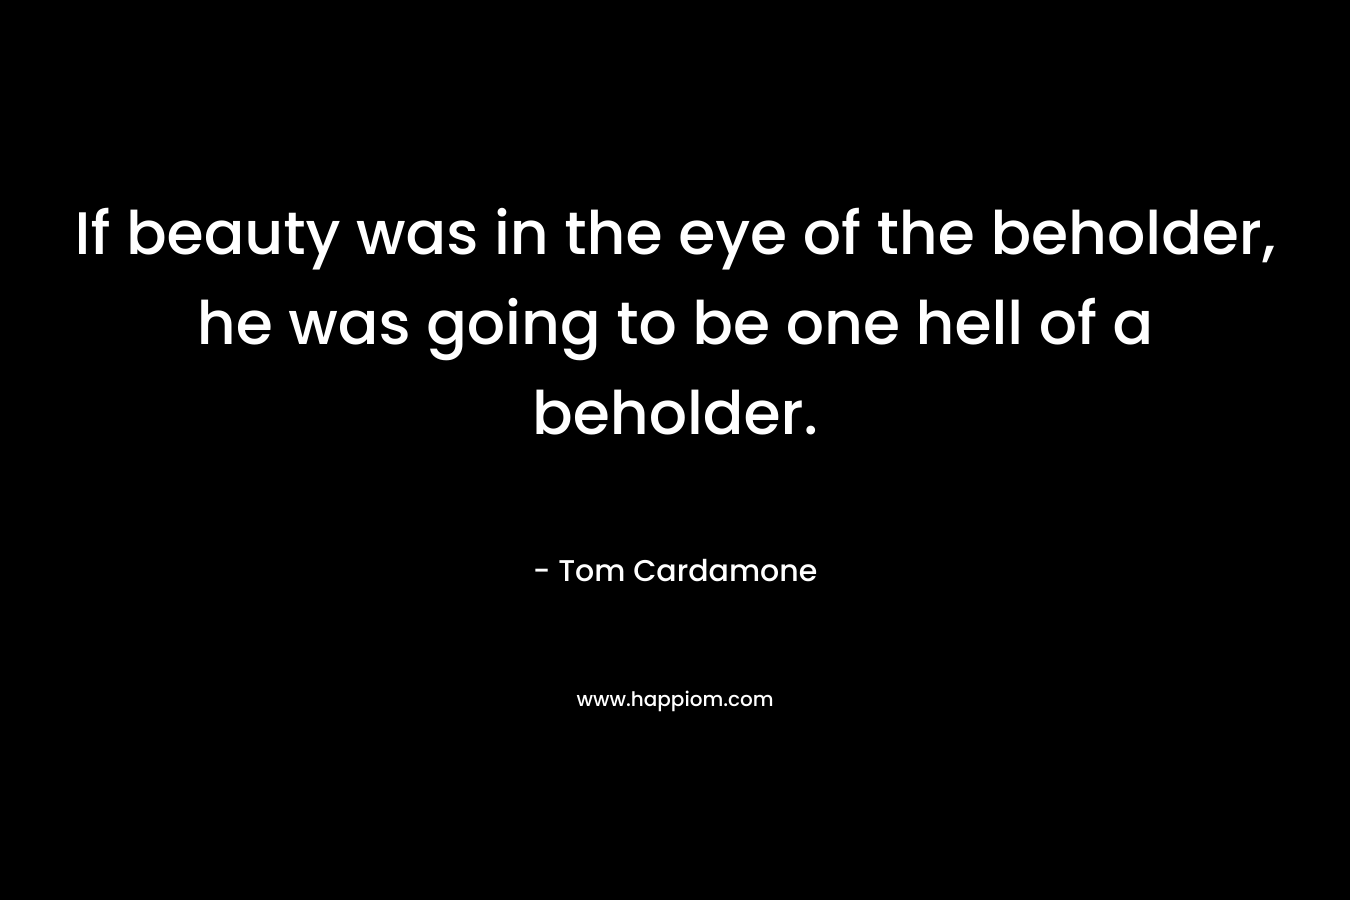 If beauty was in the eye of the beholder, he was going to be one hell of a beholder.